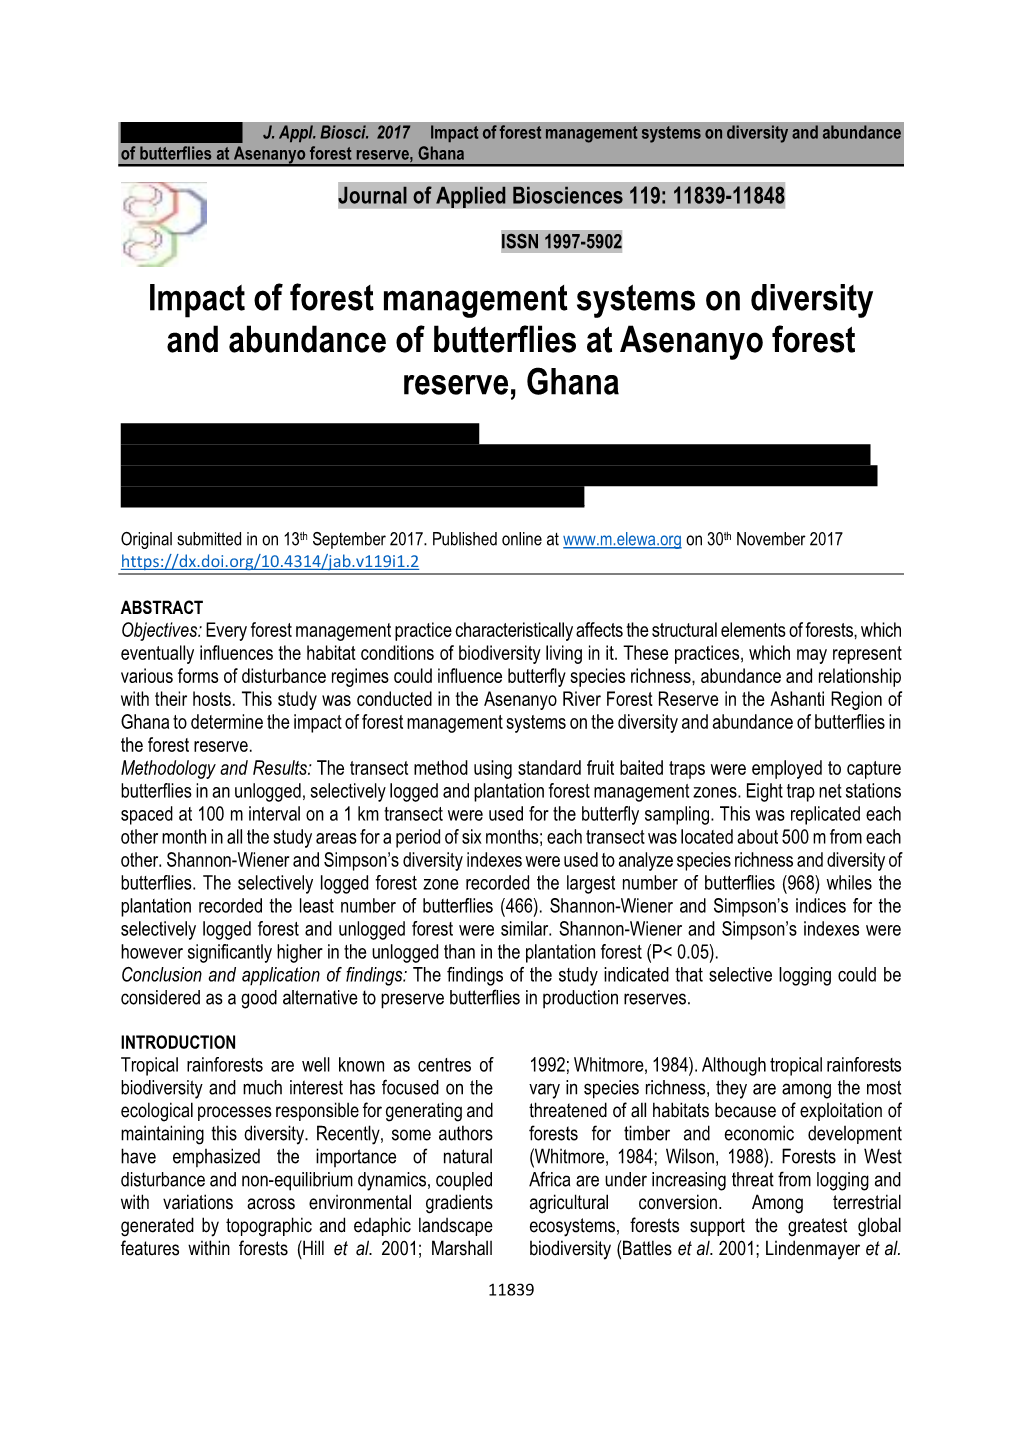 Impact of Forest Management Systems on Diversity and Abundance of Butterflies at Asenanyo Forest Reserve, Ghana Journal of Applied Biosciences 119: 11839-11848